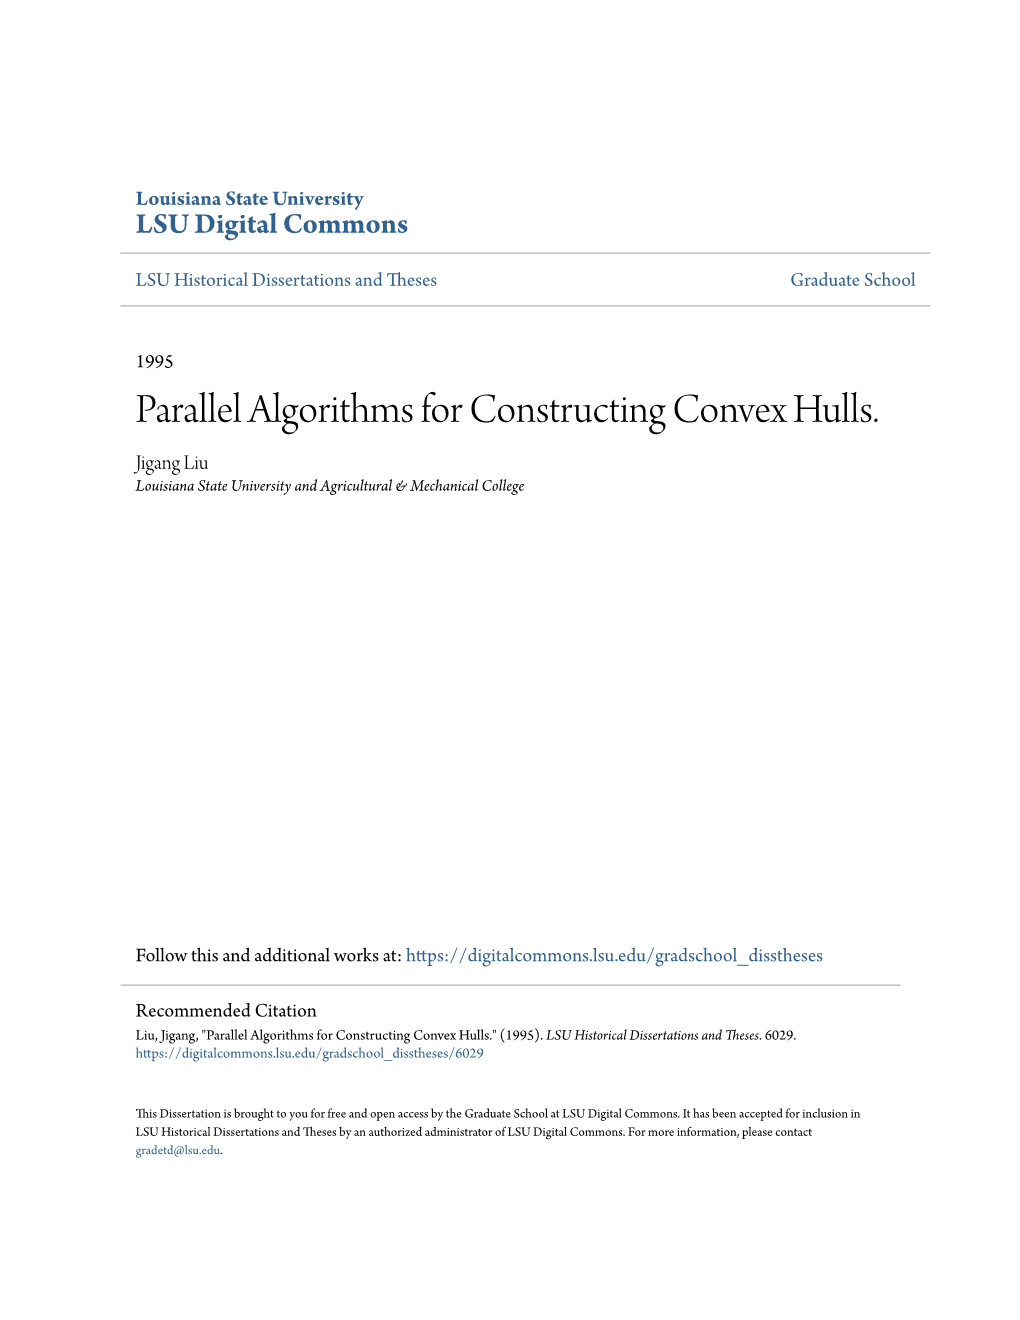 Parallel Algorithms for Constructing Convex Hulls. Jigang Liu Louisiana State University and Agricultural & Mechanical College